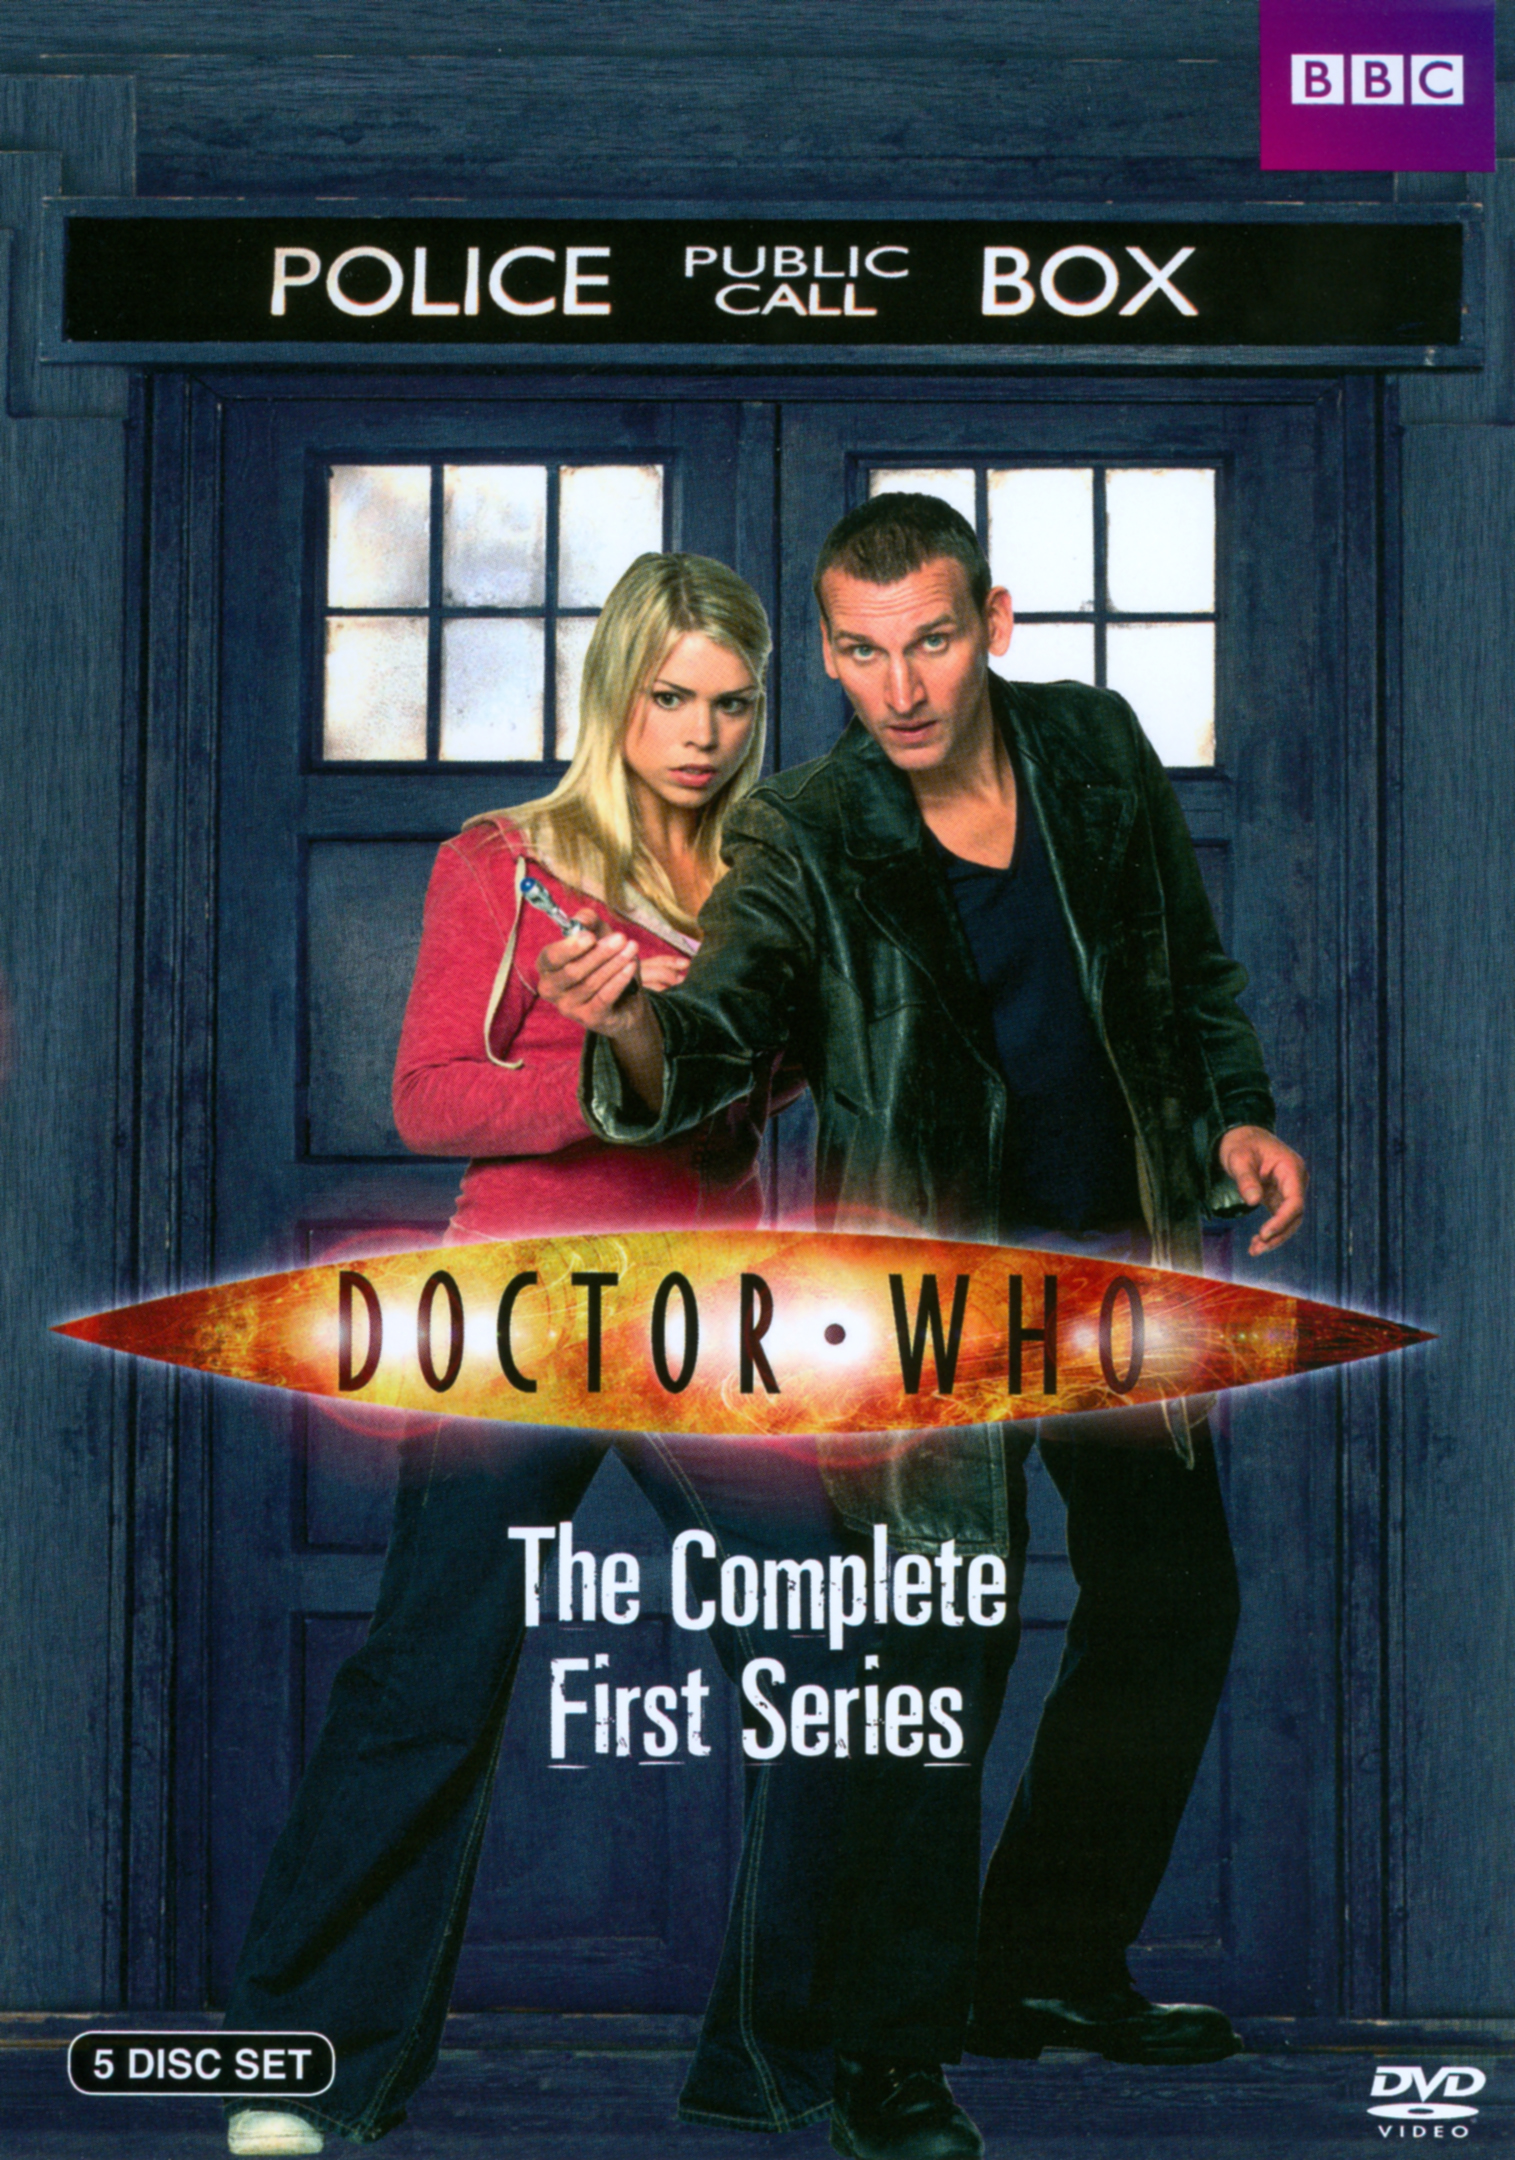 Doctor Who DVD/Book Collection Overview 1 - The First Doctor 